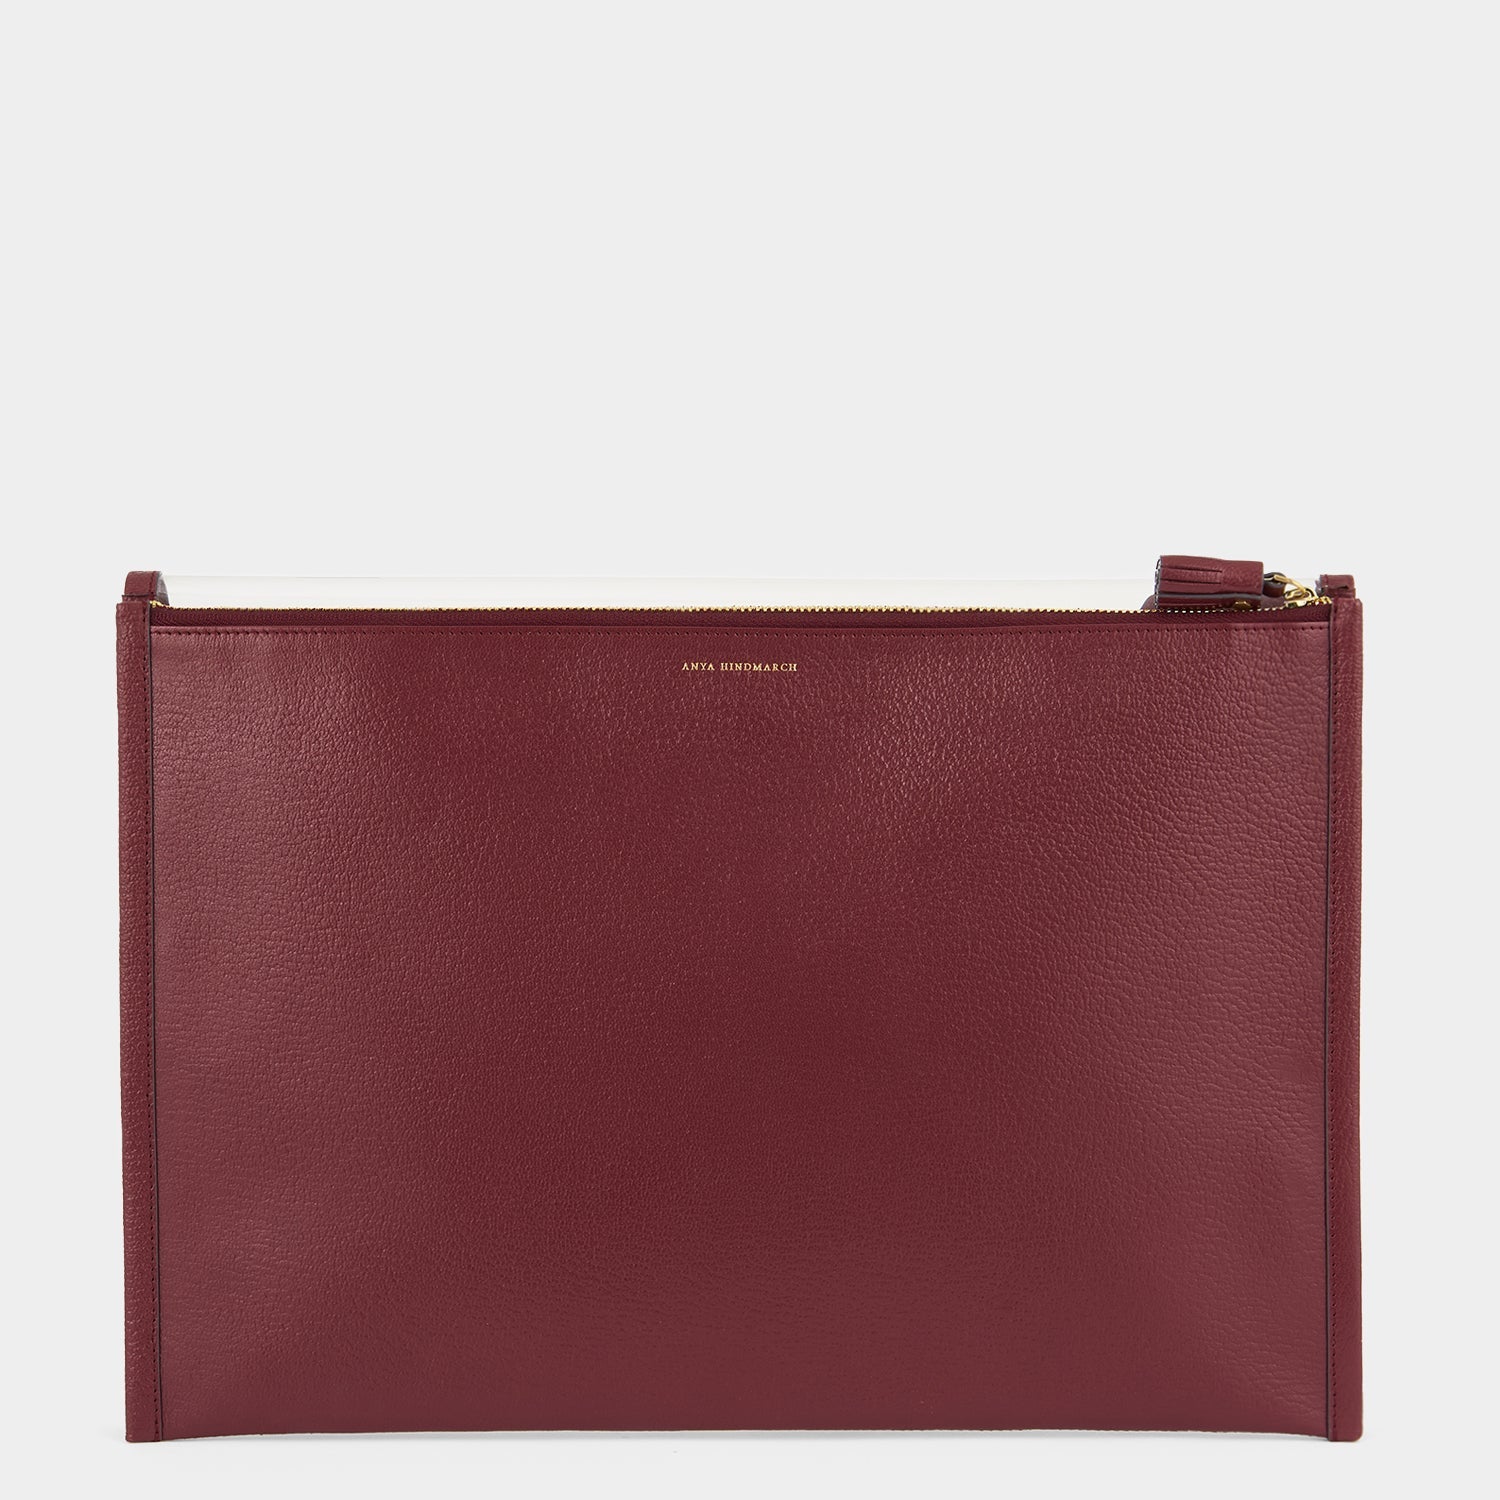 Documents Envelope -

                  
                    Capra Leather in Medium Red/Clear -
                  

                  Anya Hindmarch US
